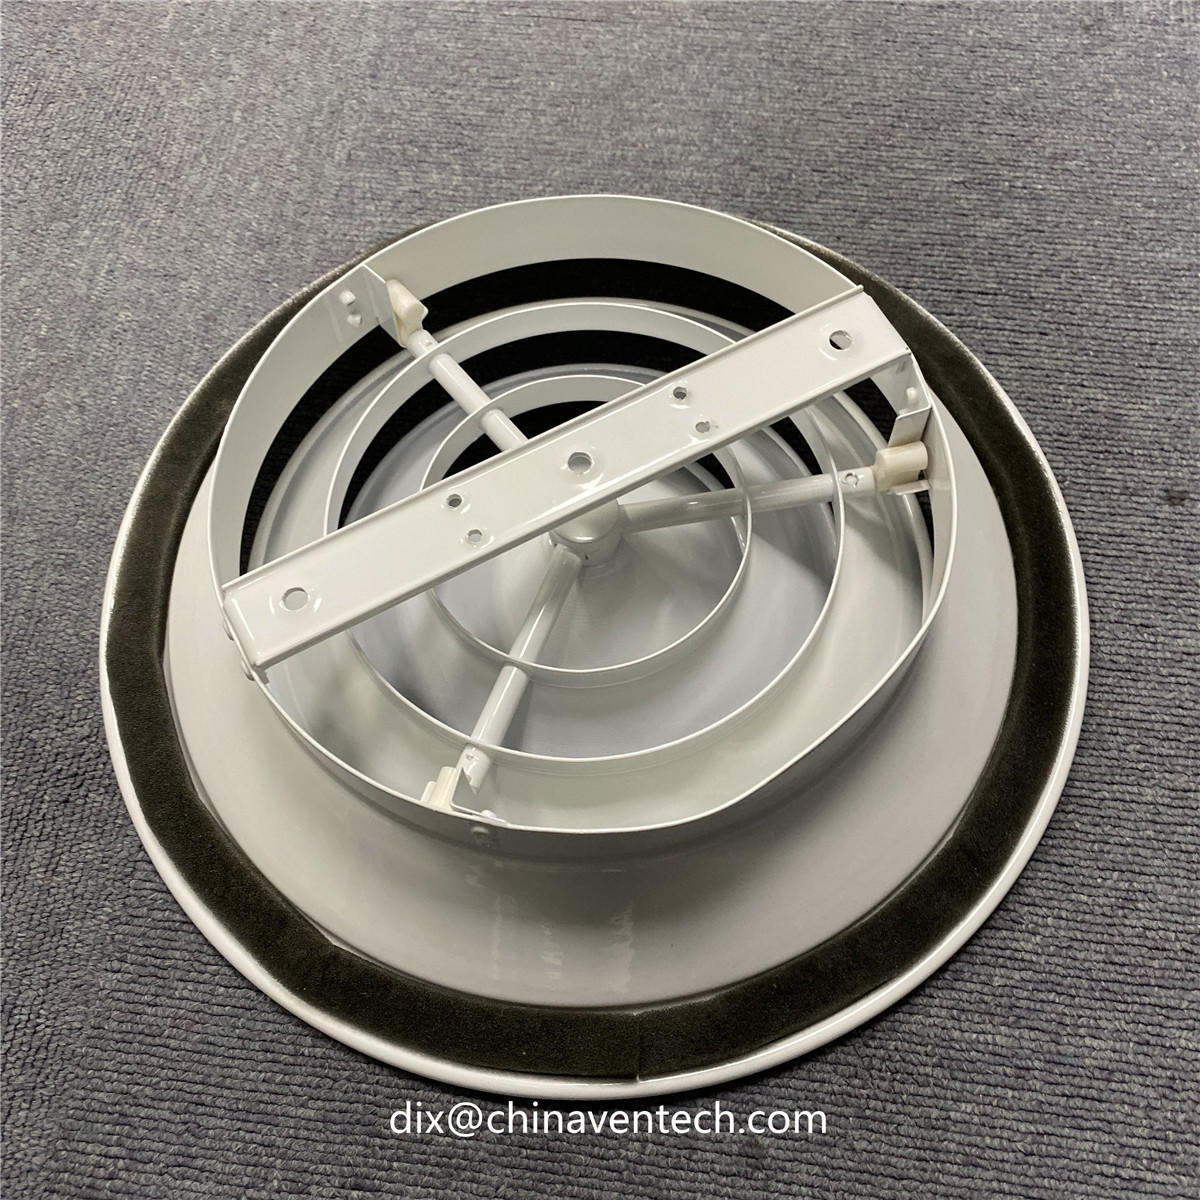 Hvac Air Ducting Work Air OUtlet 250mm Round Cone Ceiling Diffuser